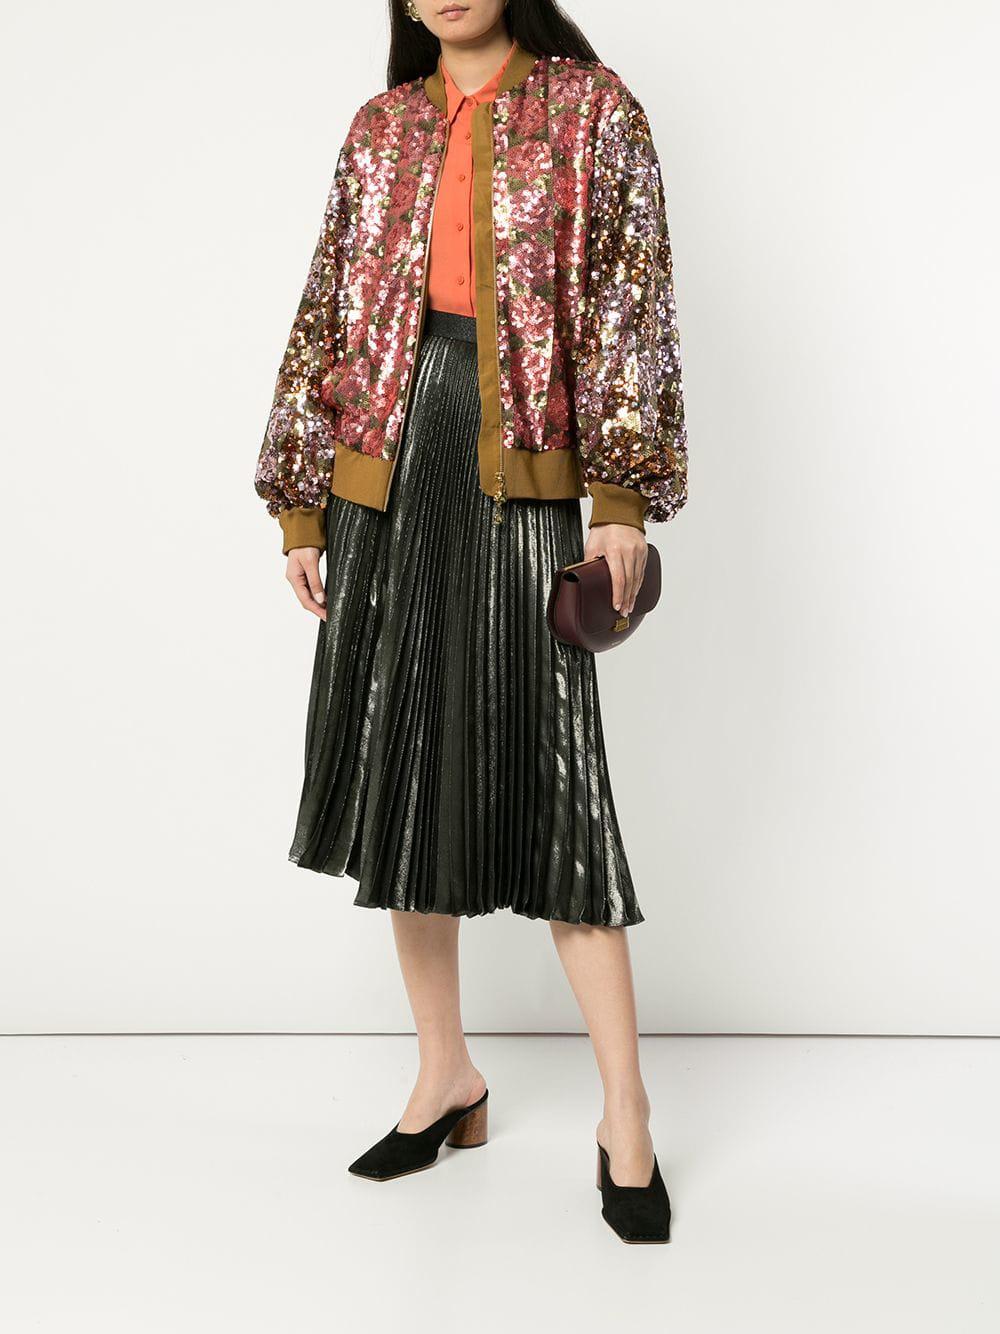 Stine Goya Synthetic Clive Sequin Bomber Jacket in Pink - Lyst